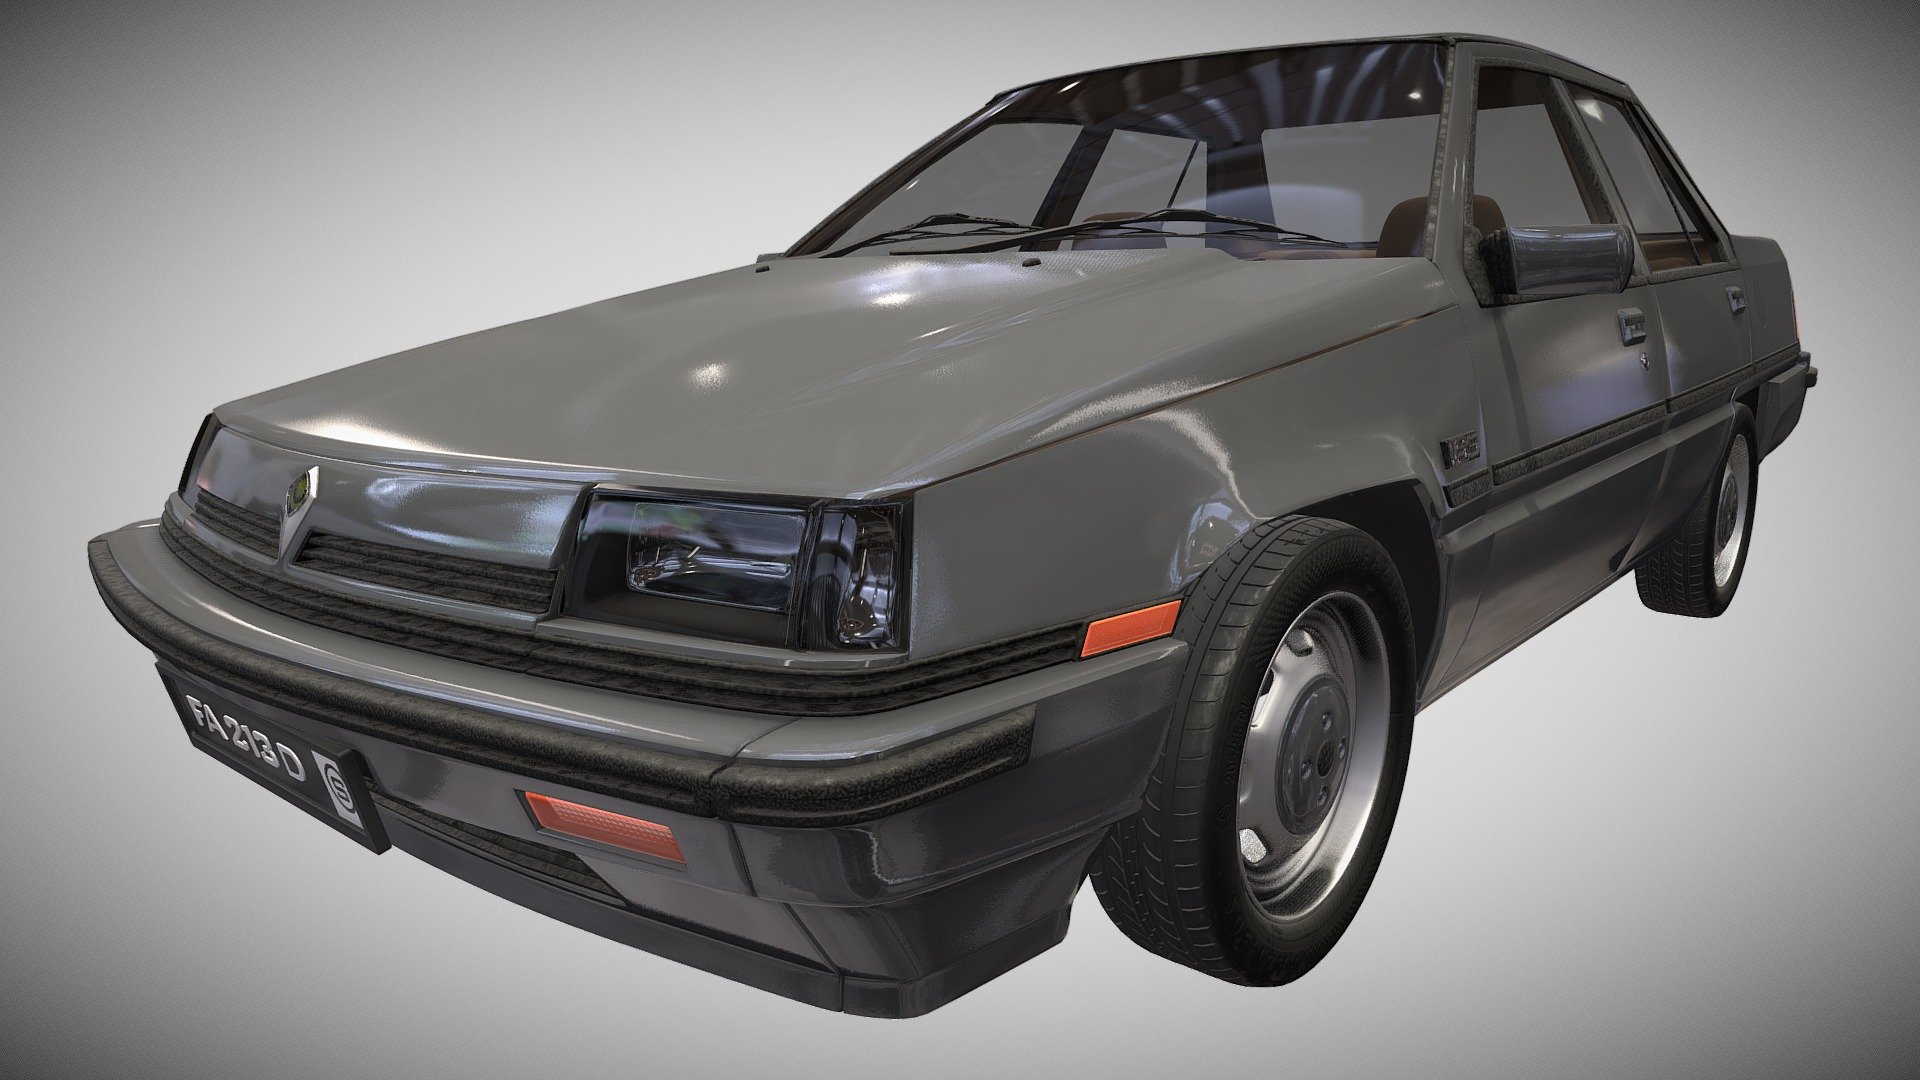 Please visit : fazt.3ds IG for more info
Buy this model at cgtrader/fazt-3ds - PROTON SAGA - 3D model by fazt.3ds 3d model